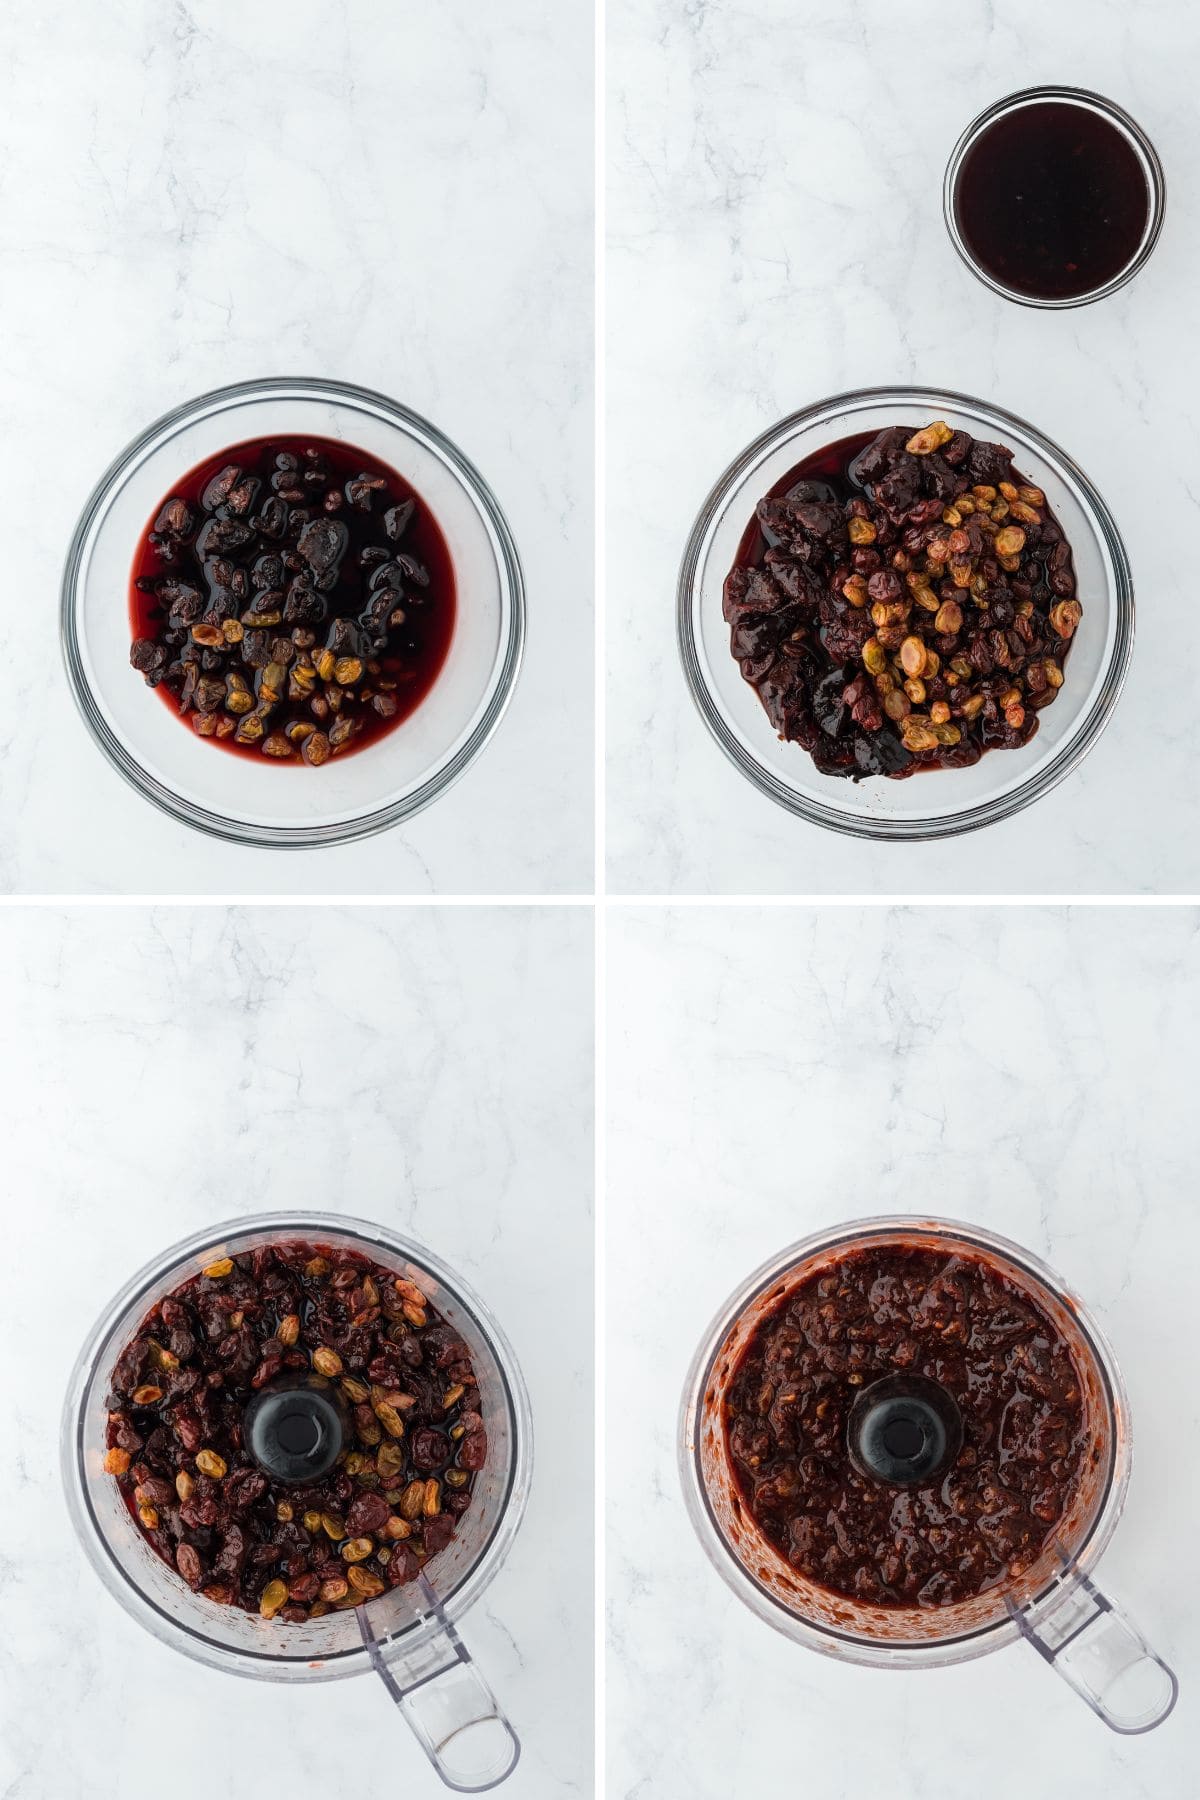 A step by step image collage on how to make Jamaican black cake with mixng all the fruit mixture ingredients, reserving a cup of the liquid, and blending the rest of the fruit